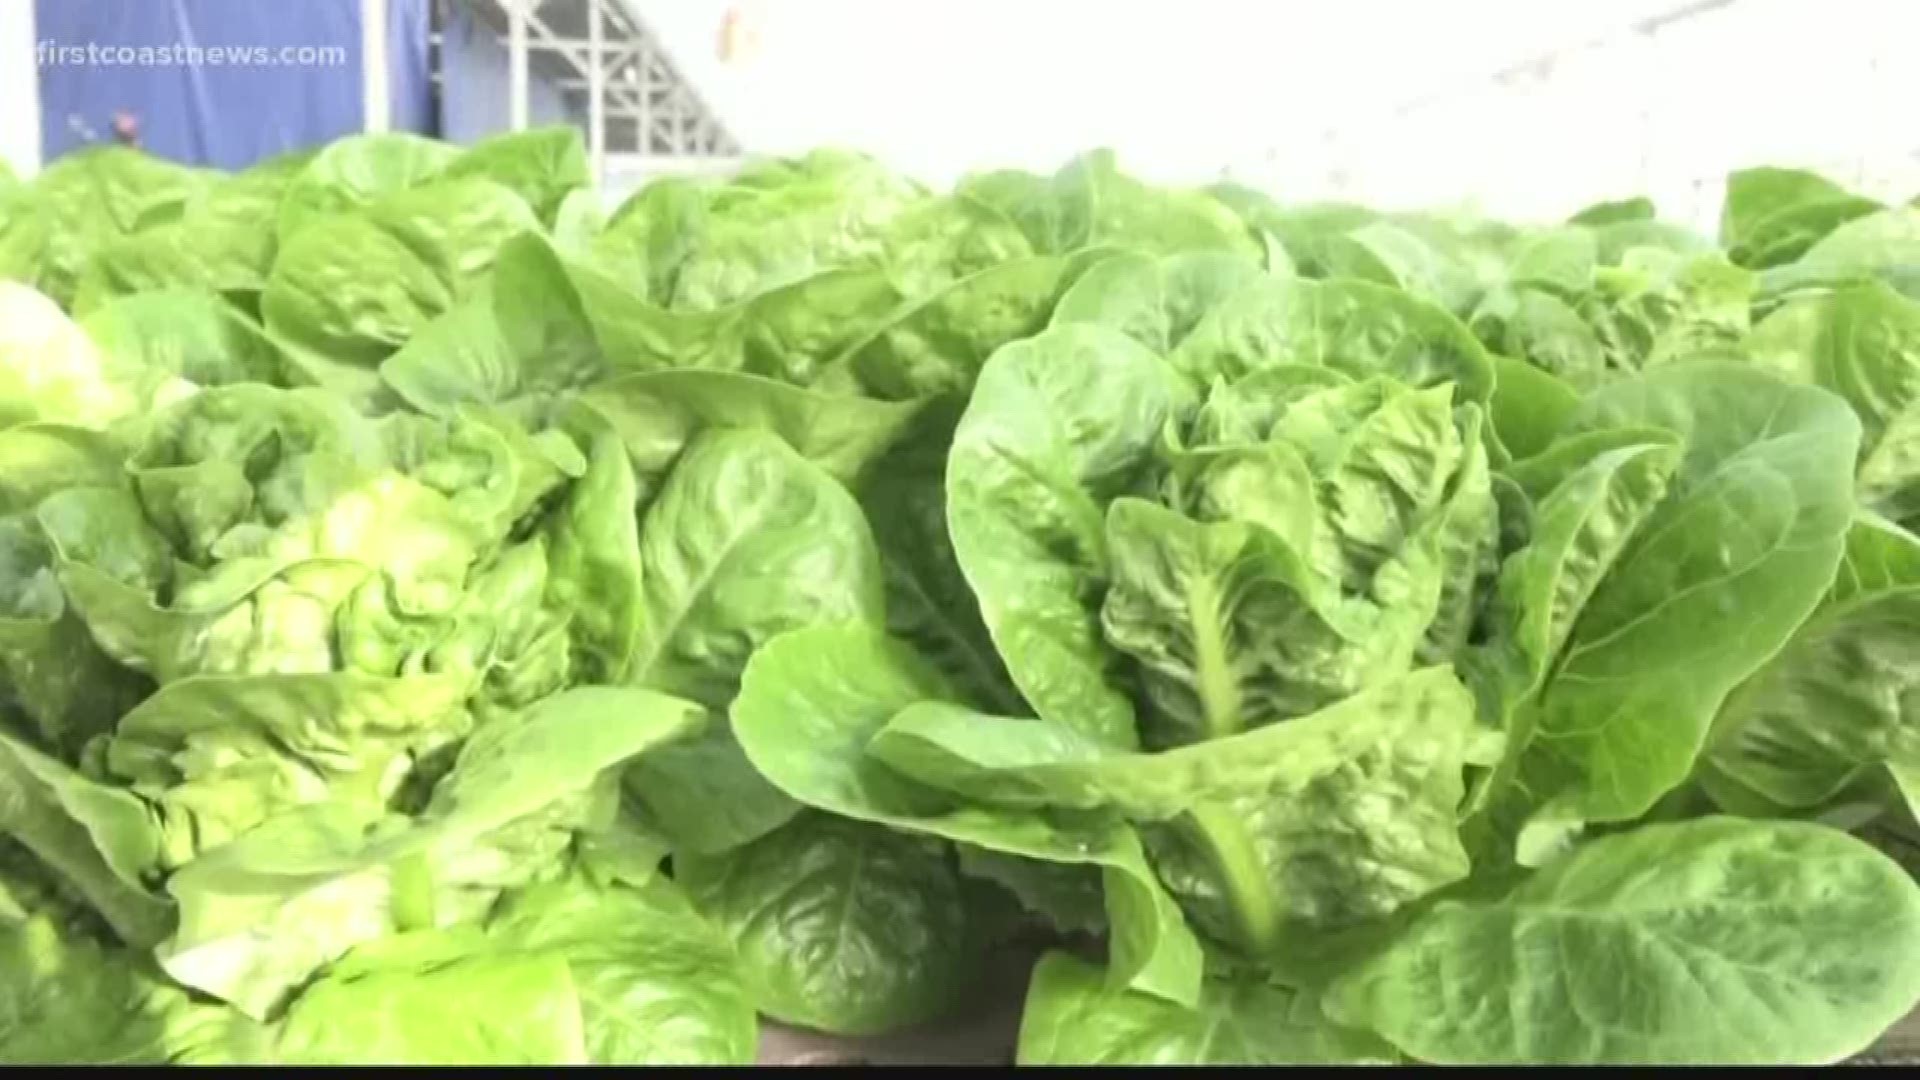 Traders Hill Farm in Hilliard uses aquaponics to farm. It uses nutrients in fish waste to feed their plants. No pesticides, herbicides, or fungicides are used.